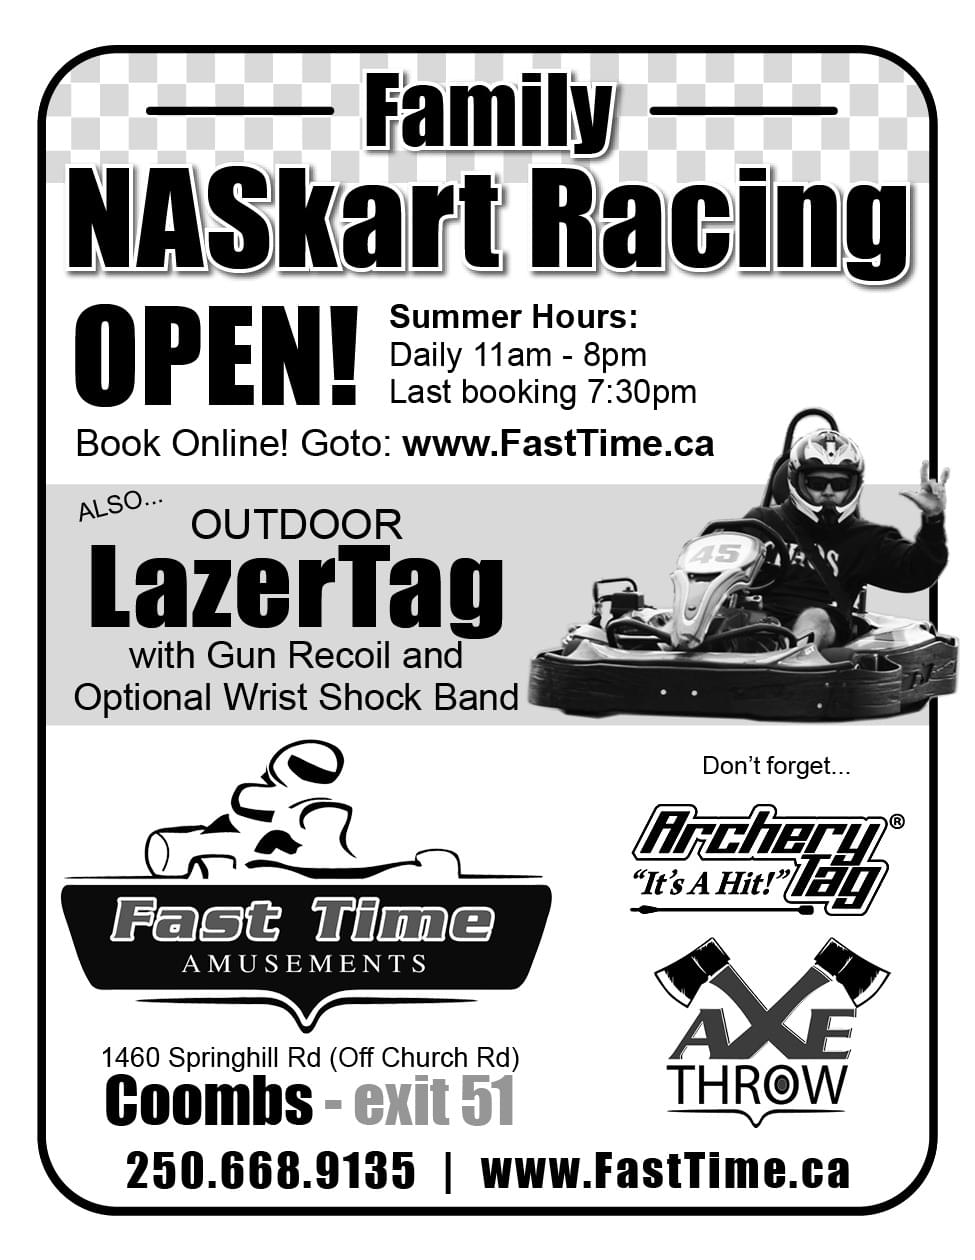 Fast Time Amusements Ad in Coffee News